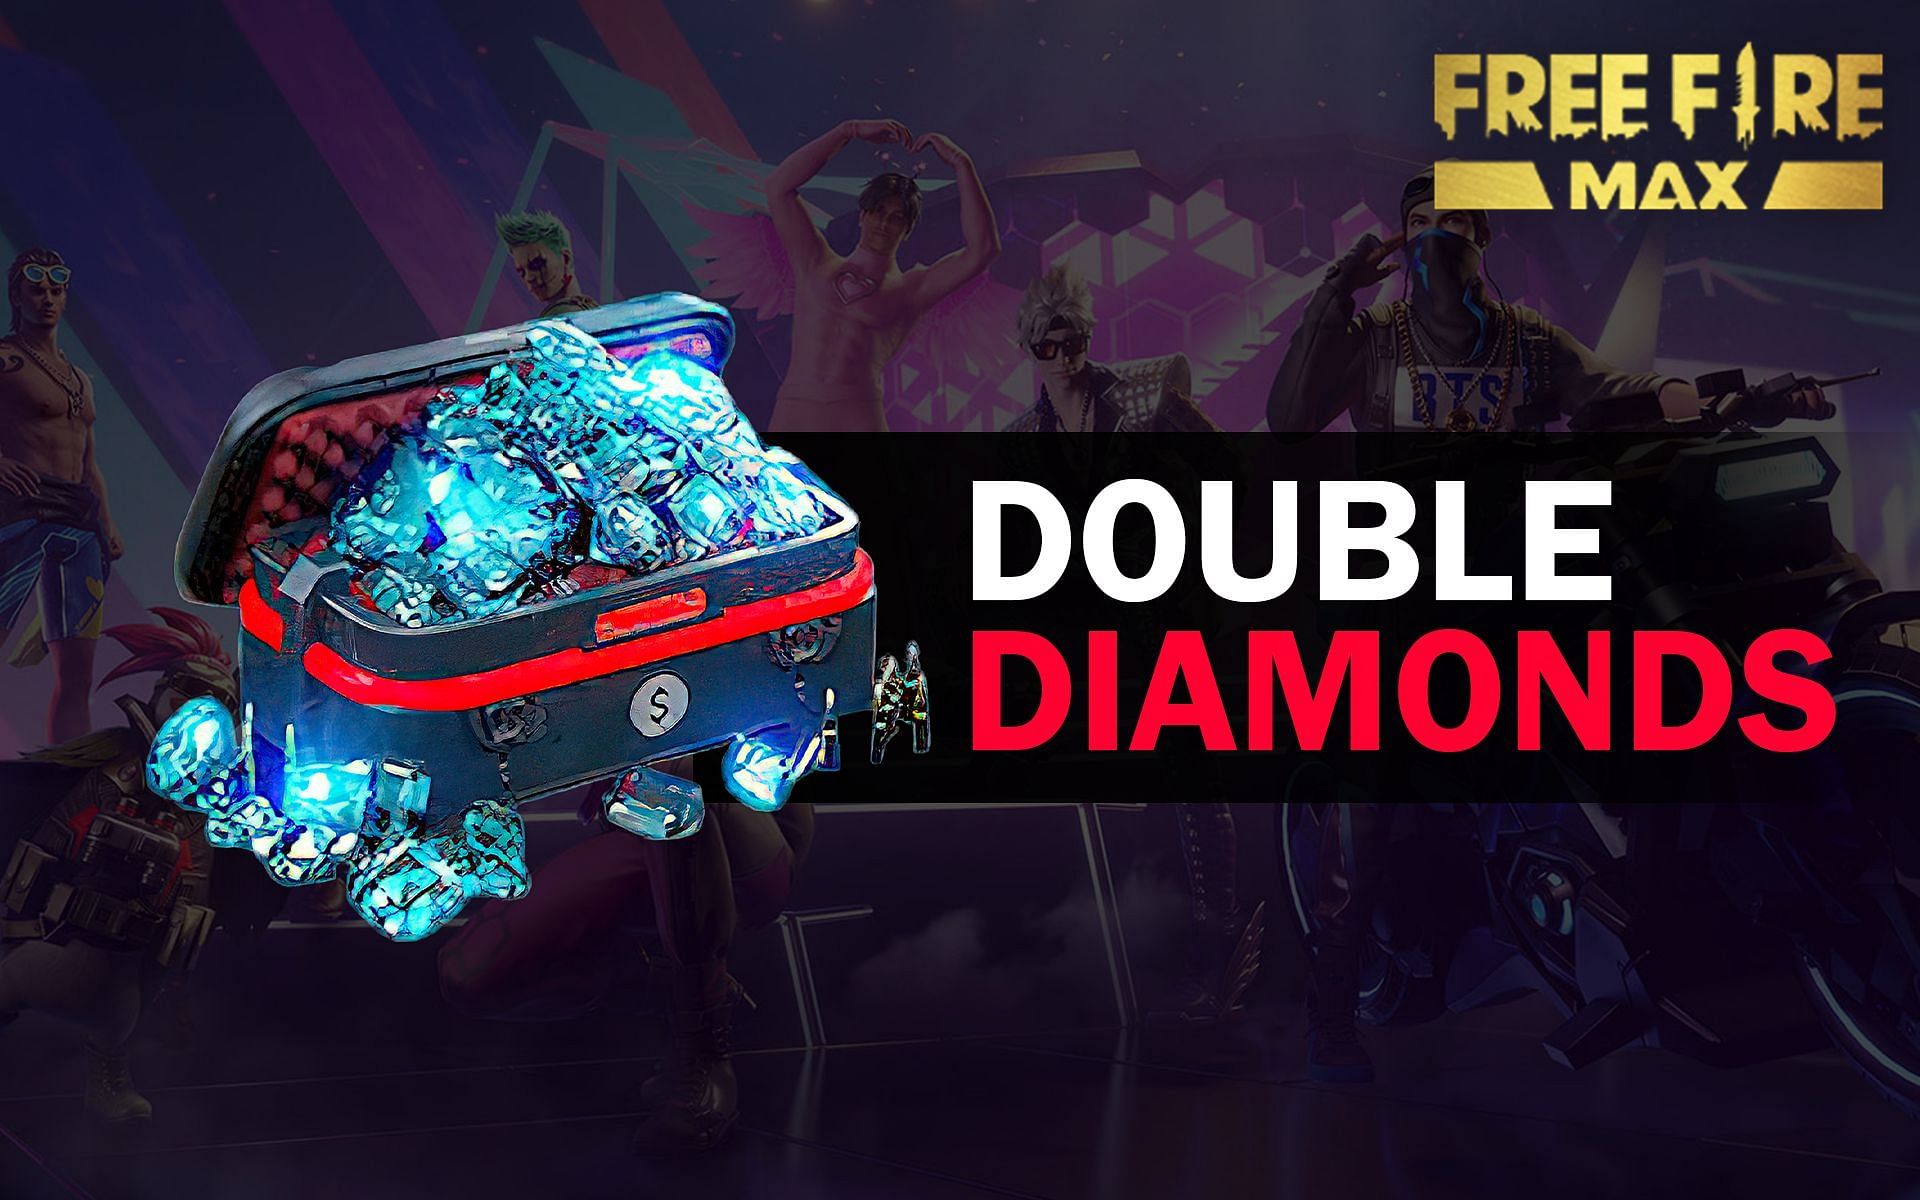 The new event provides Double Diamonds to Free Fire players (Image via Garena)